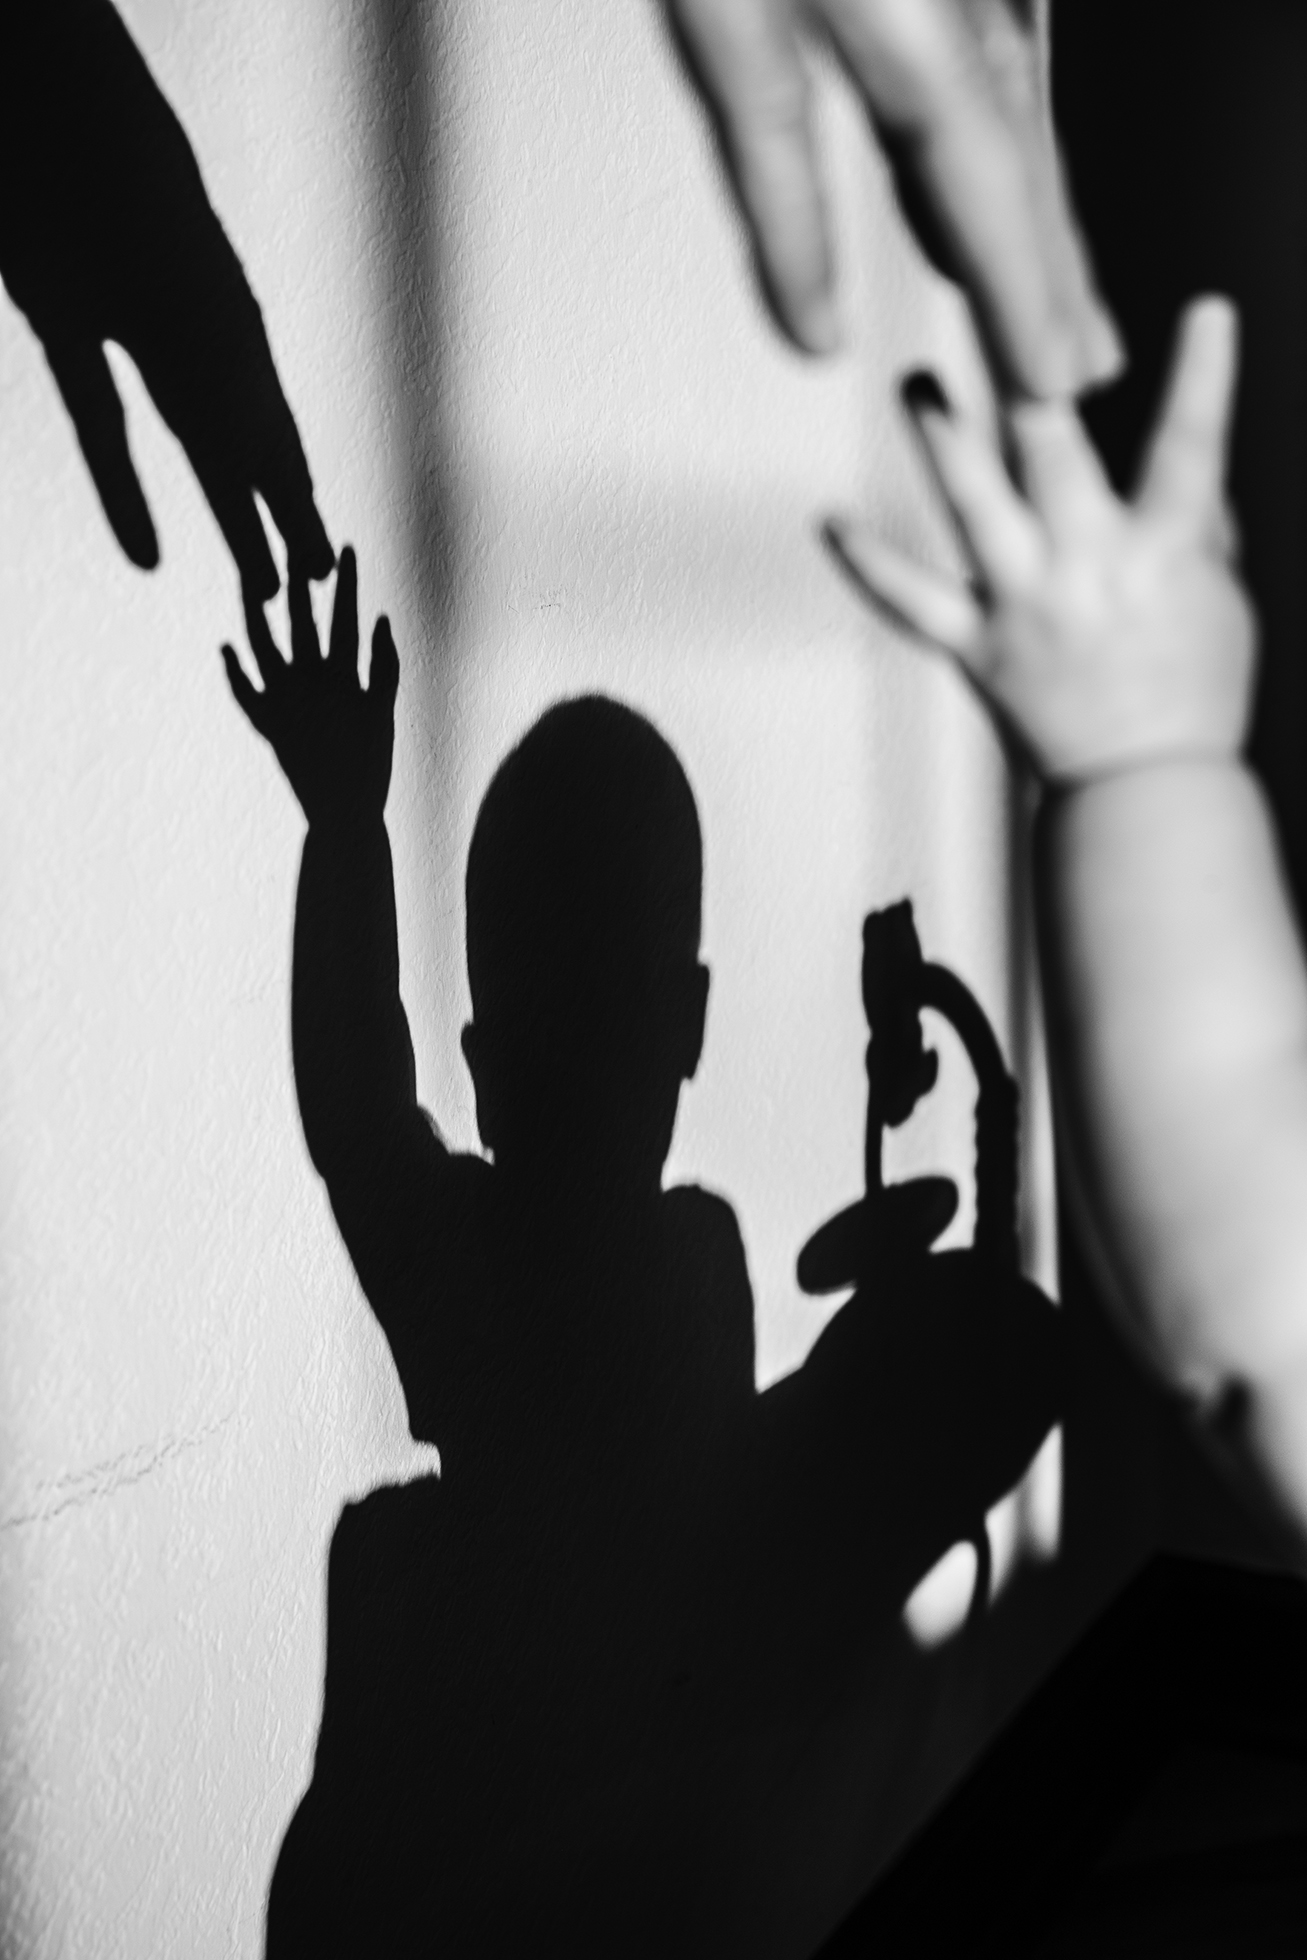 A shadow on a wall of an adult’s fingers reaching down and touching the fingers of a child’s upstretched arm. The shadow shows the child’s head and torso as well.  On the upper right is the actual adult’s fingers and child’s arm and hand.